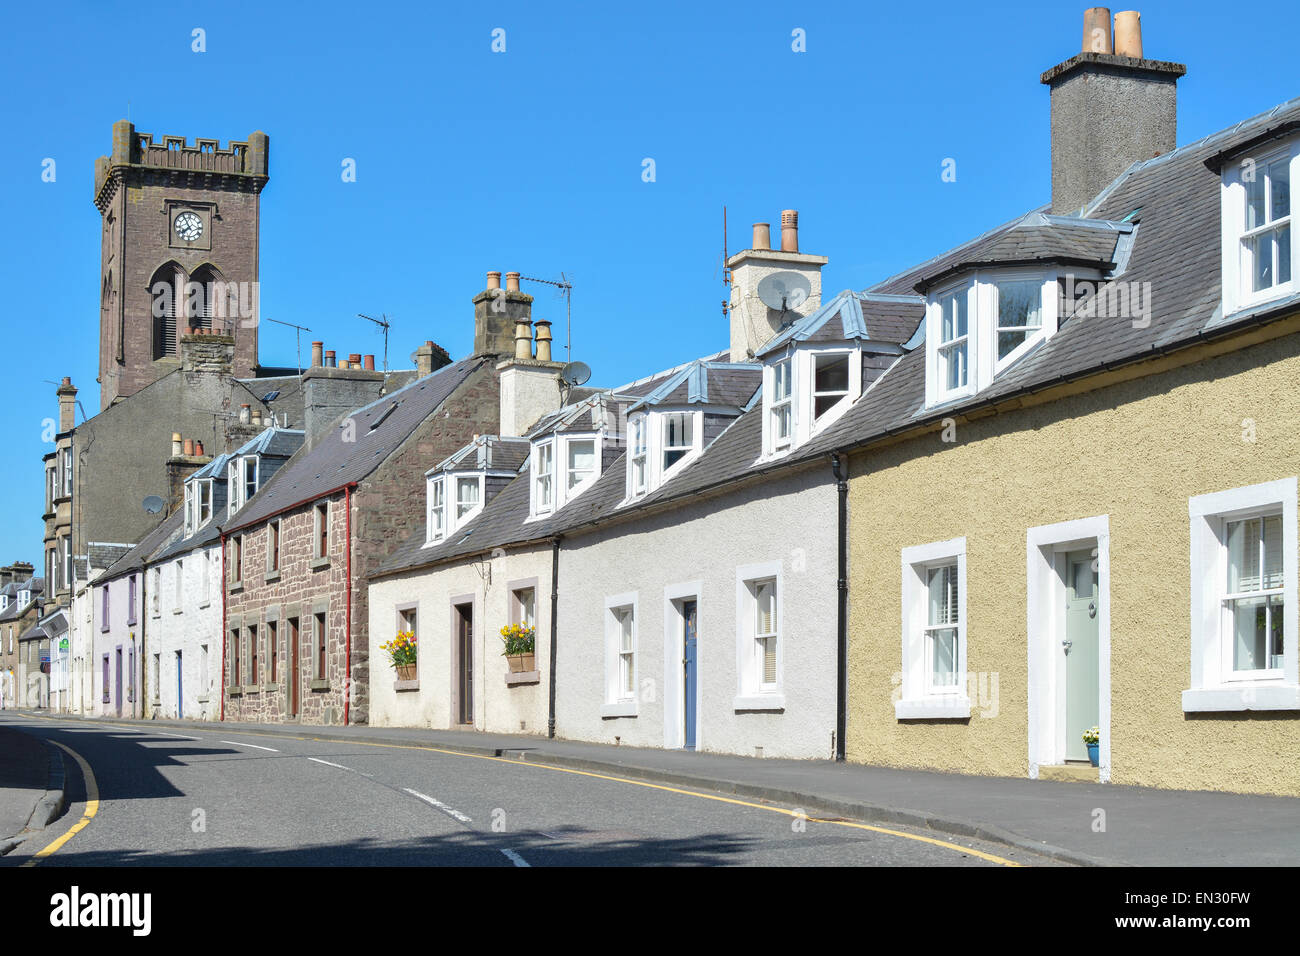 DOUNE, STIRLING, SCOTLAND, UK - 23 APRIL 2015: Traditional Scottish cottages on Main Street in the village of Doune Stock Photo